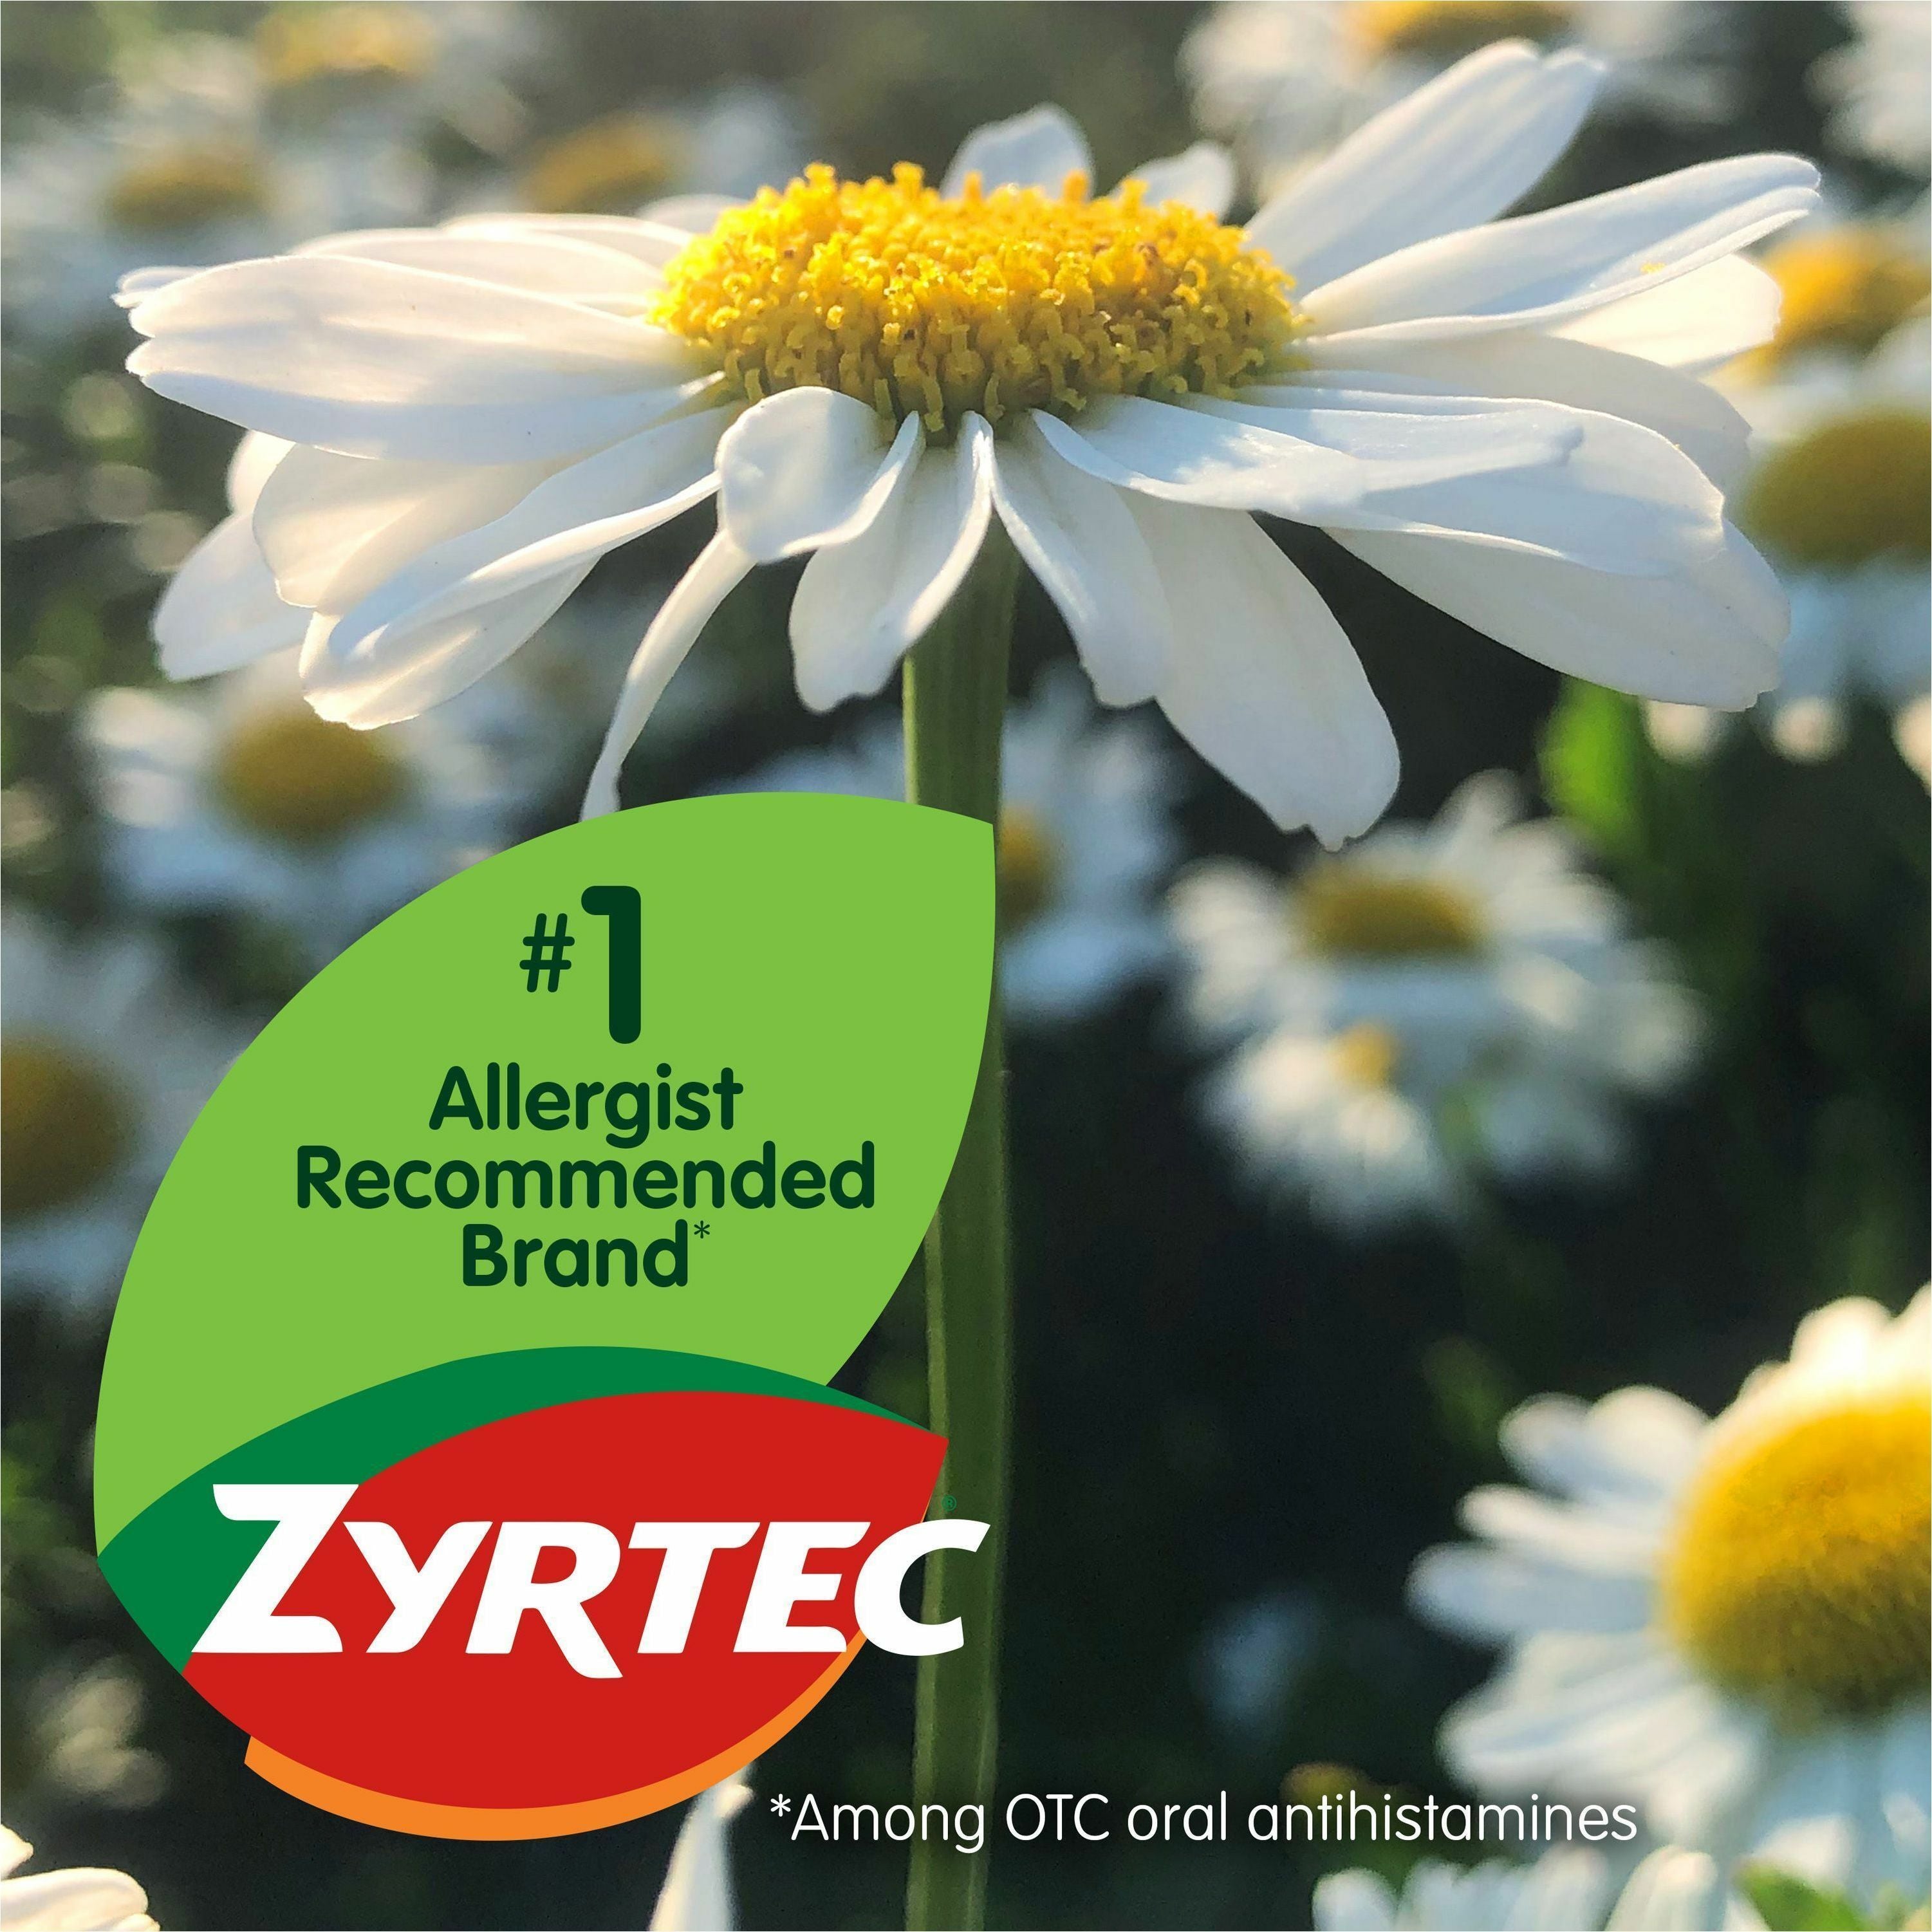 zyrtec-allergy-tablets-for-runny-nose-sneezing-itchy-throat-30-box_joj20436 - 2